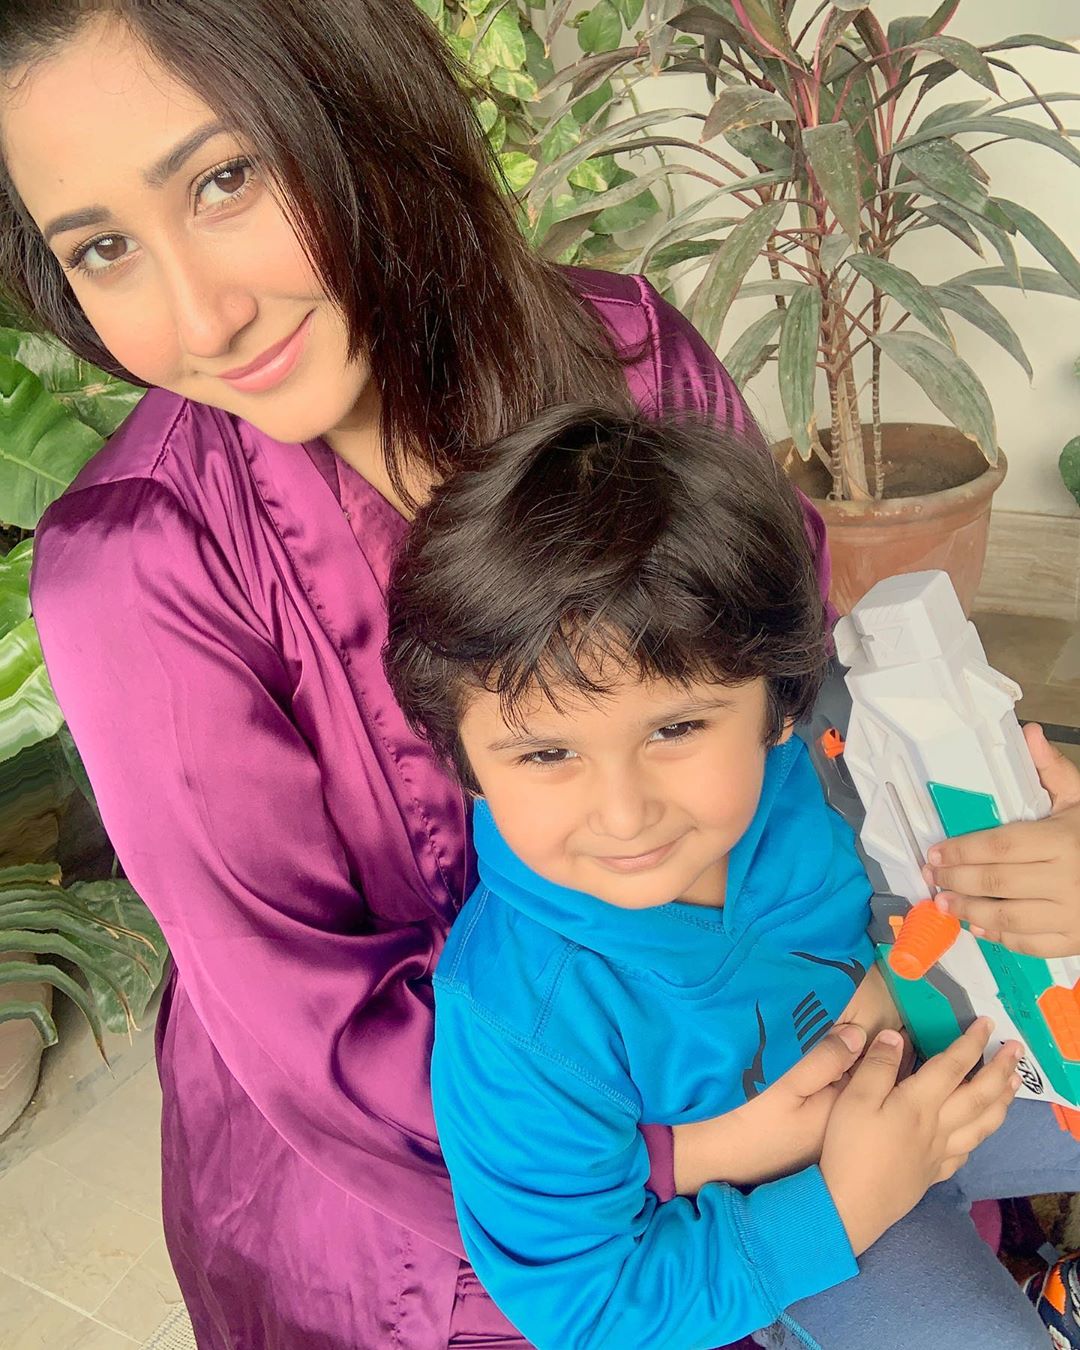 Actress Pari Hashmi Blessed with a Second Baby Boy - Adorable Pictures